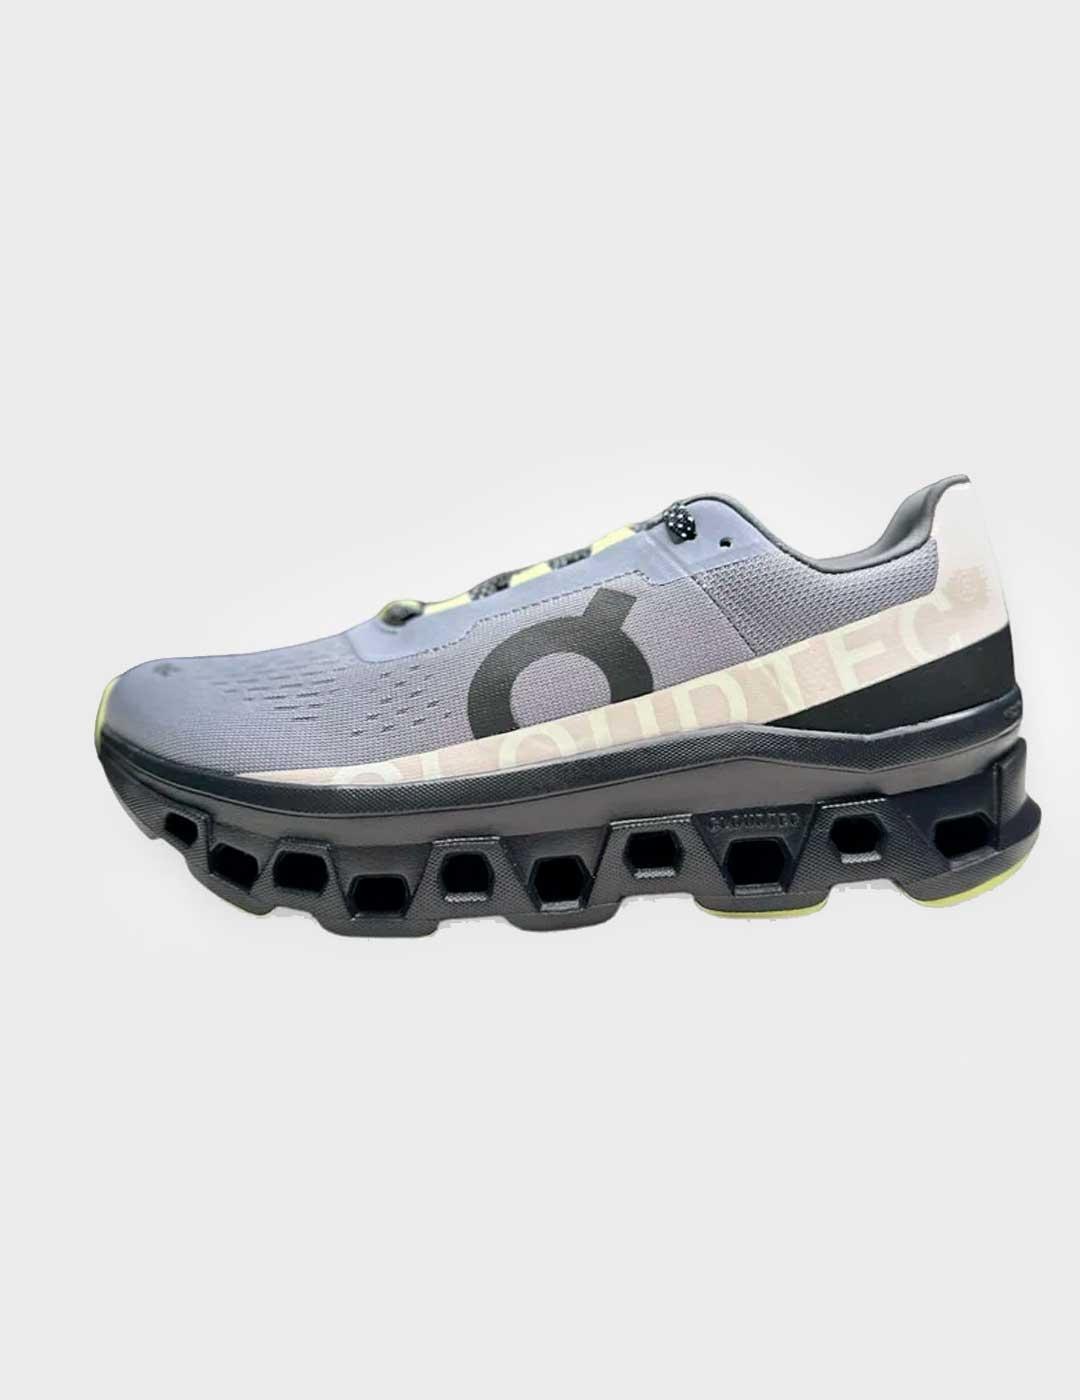 Zapatillas On Running Cloudmonster grises para hombre